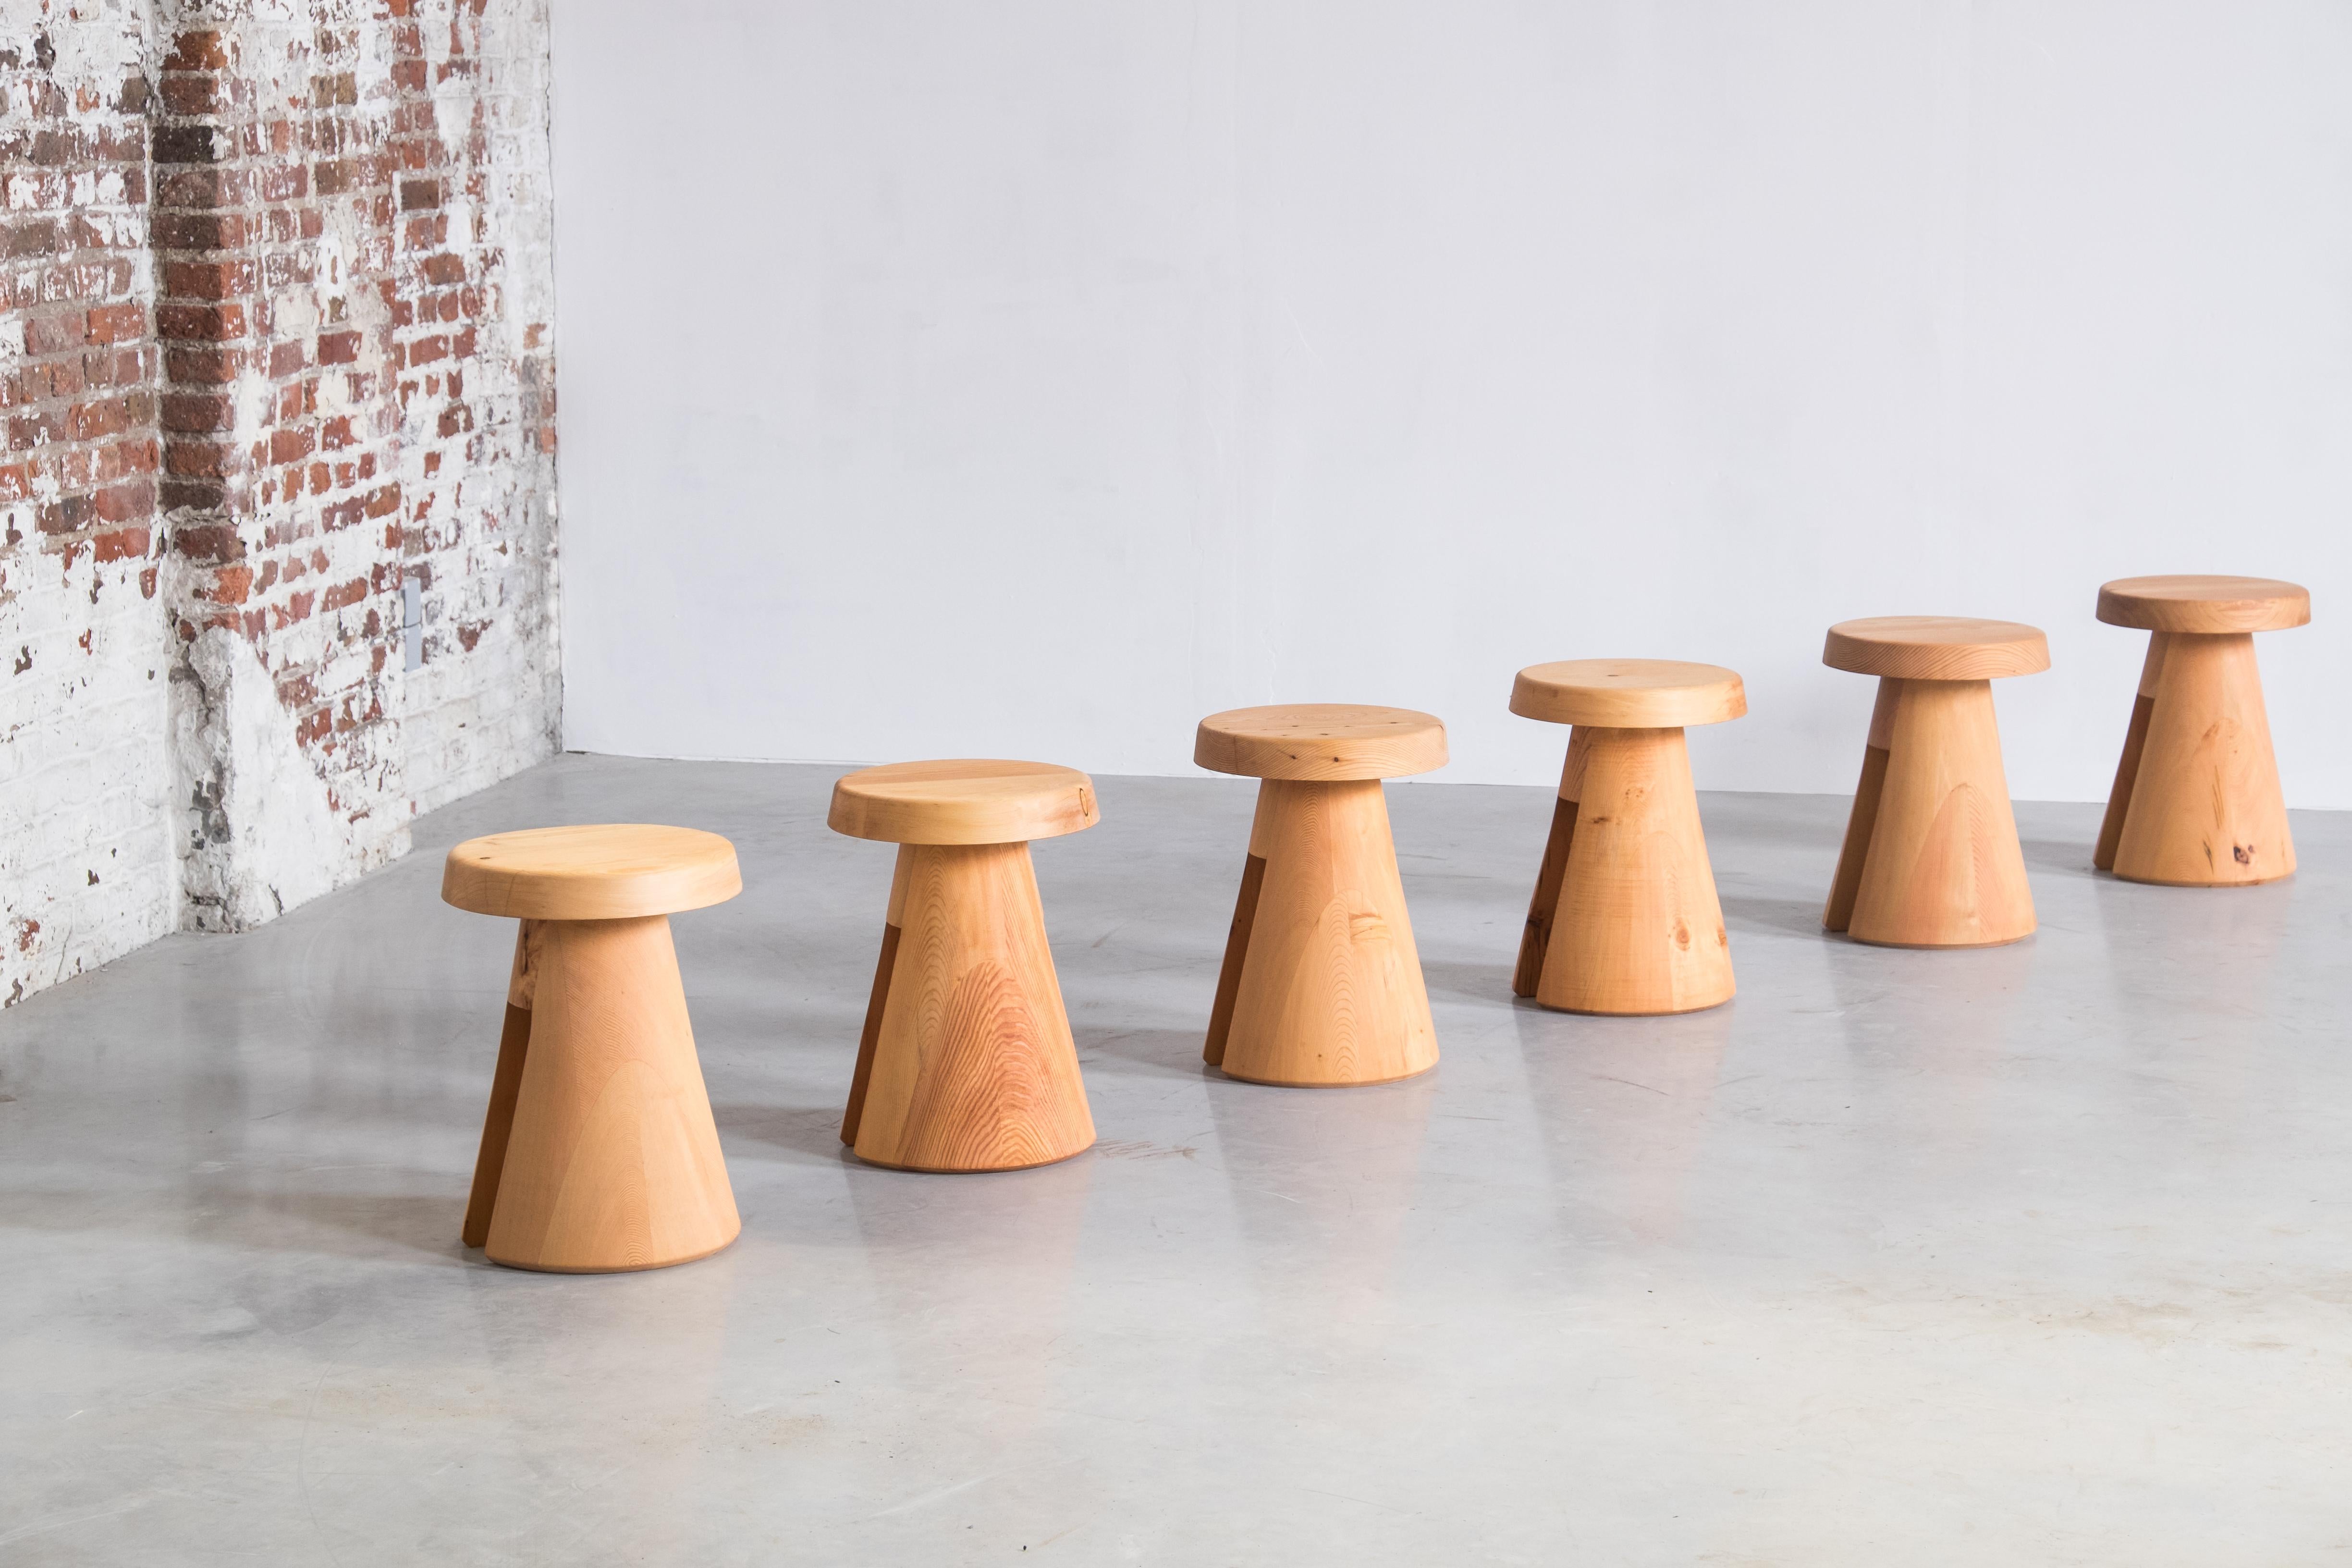 Set of 6 data stool in solid oregon by Atelier Thomas Serruys
Dimensions: H 44 x D 32cm
Materials: A hand turned stool in solid oregon. 

A hand turned stool in solid oregon. Trapezoid shaped base with rectangular void, topped by a soft edged